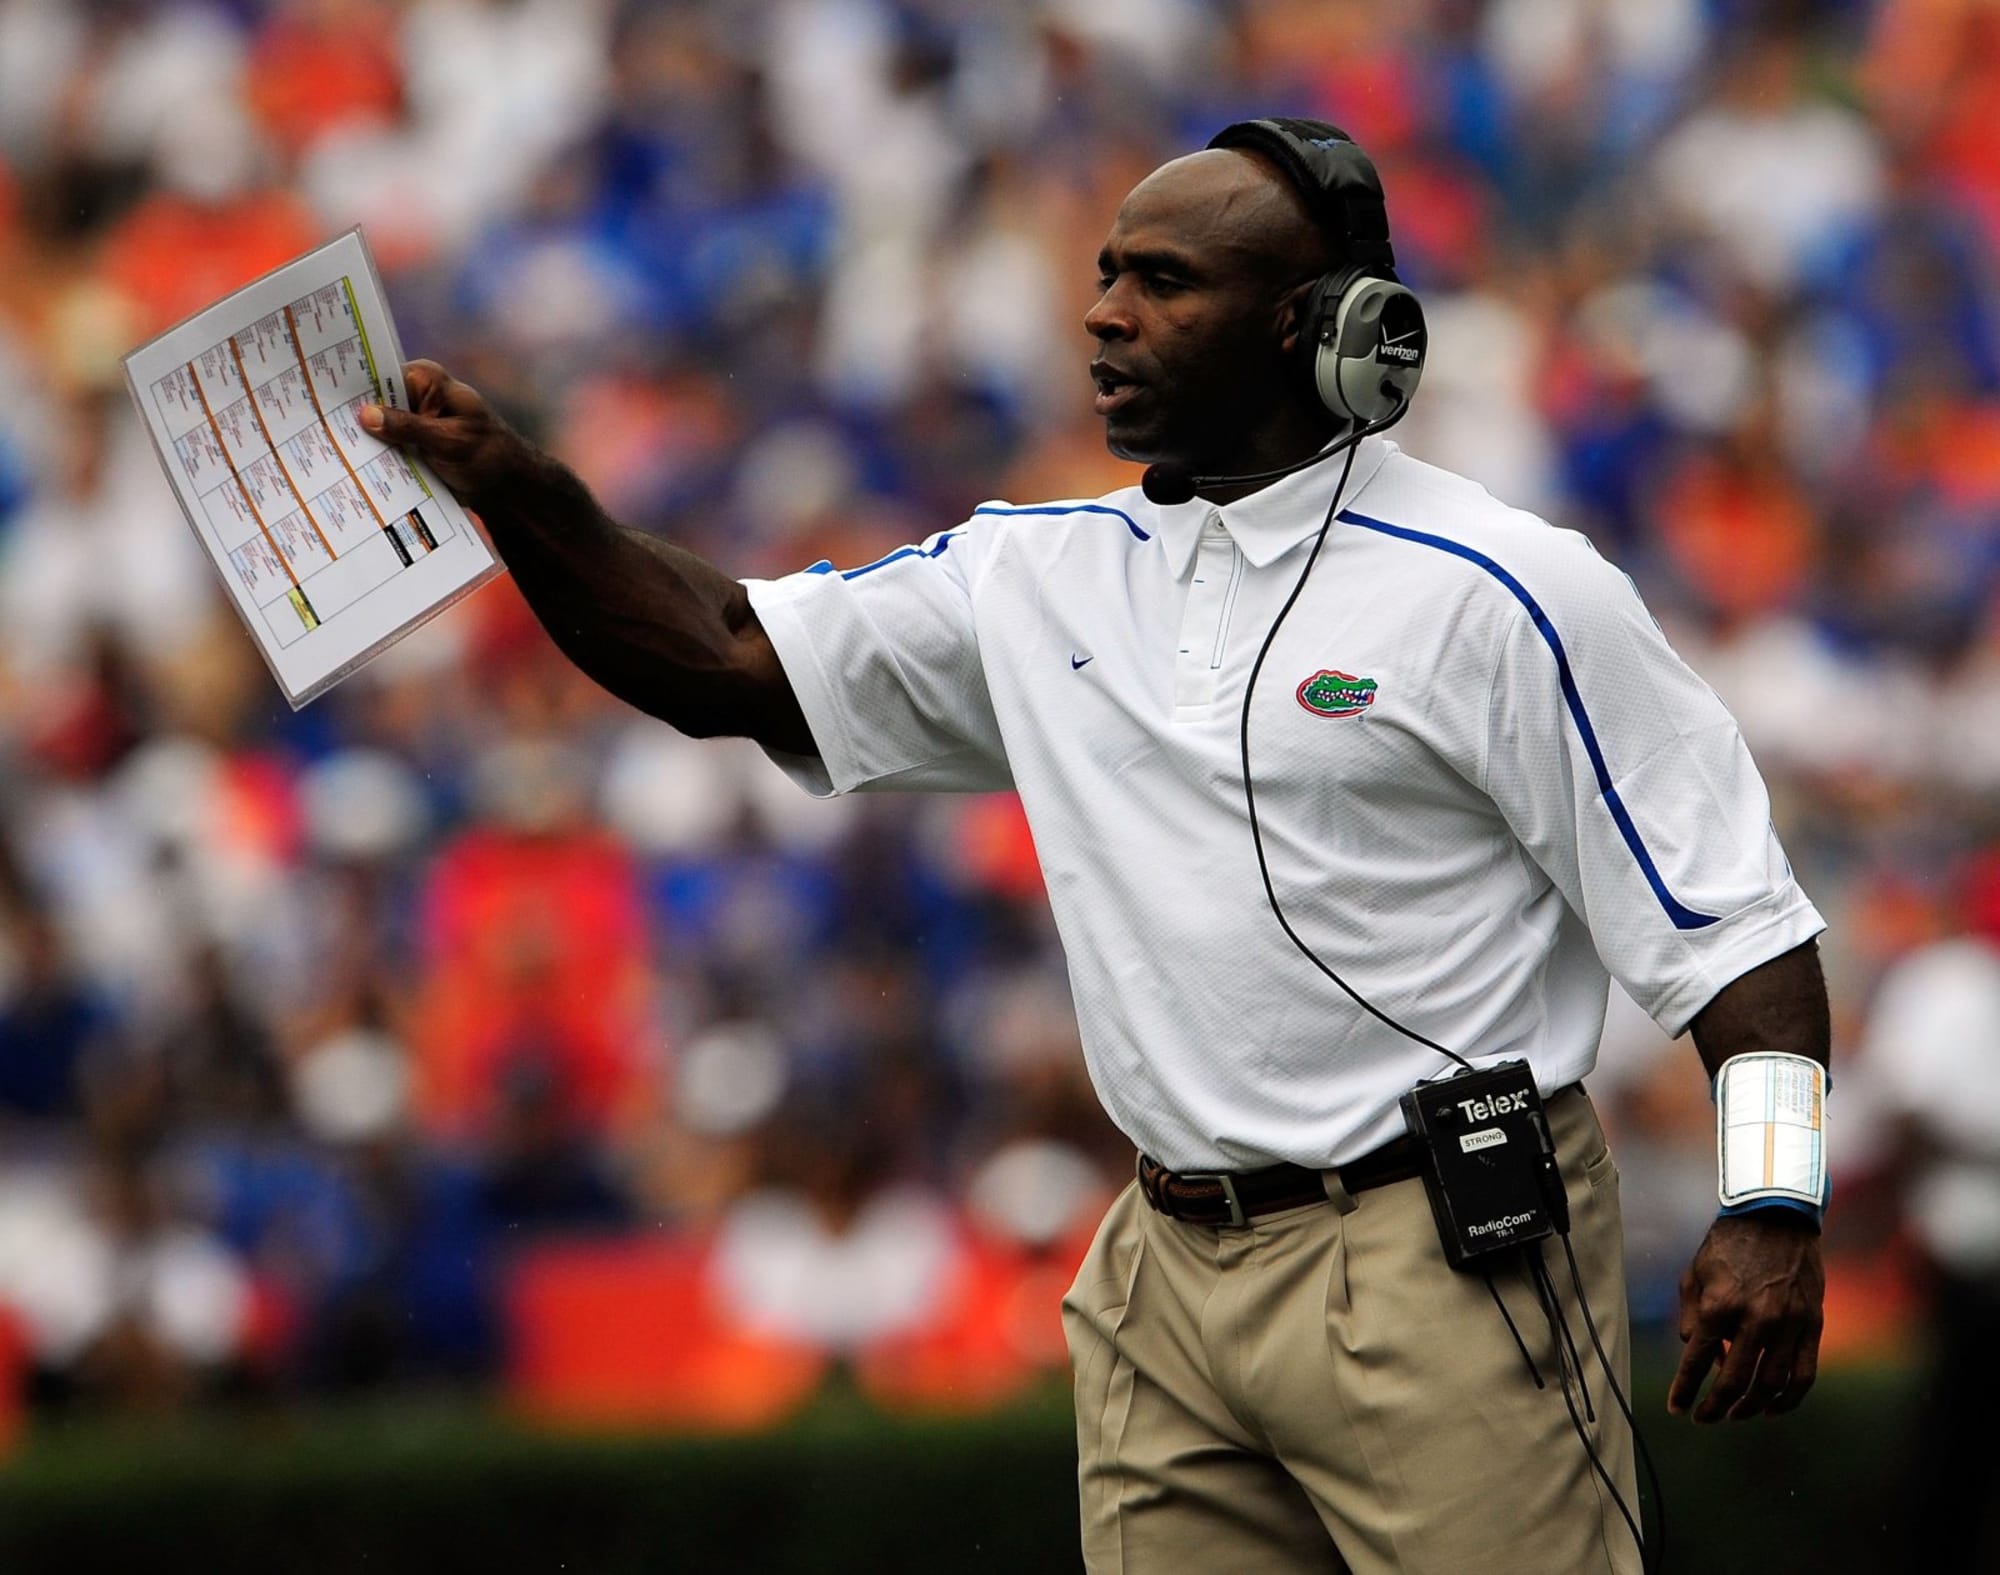 Texas Football: Charlie Strong to join Florida Gators coaching staff?